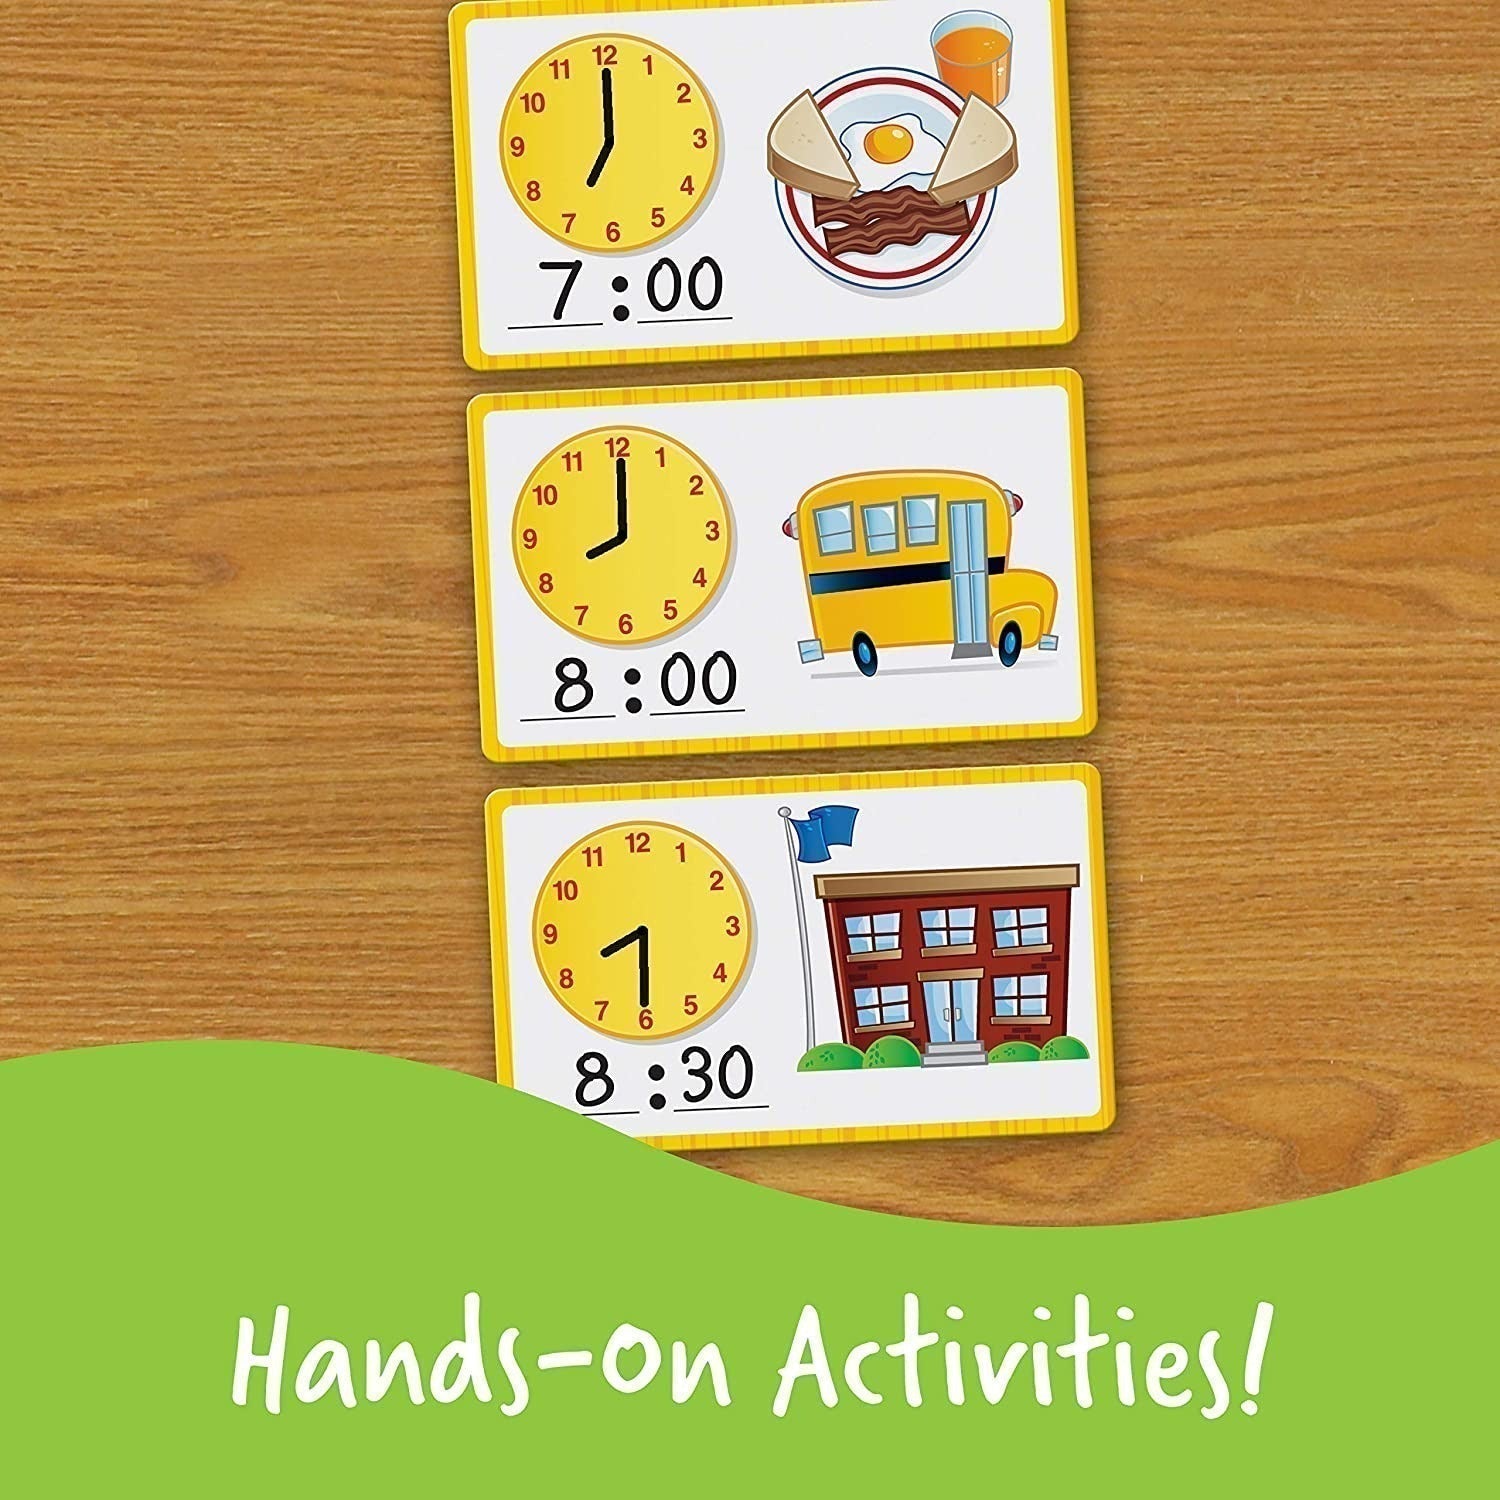 Time Activity Set, The Time Activity Set helps young learners to master time telling with these fun, hands-on activities and teaching resources. It’s time to learn all about time. Help your class build time-telling skills with this classroom-ready activity set that’s ideal for small group play. Everything you need to teach time in just one box! Features digital and analogue time formats Activities support beginners, intermediate and more advanced learners Contains wipe-clean components for use time and time